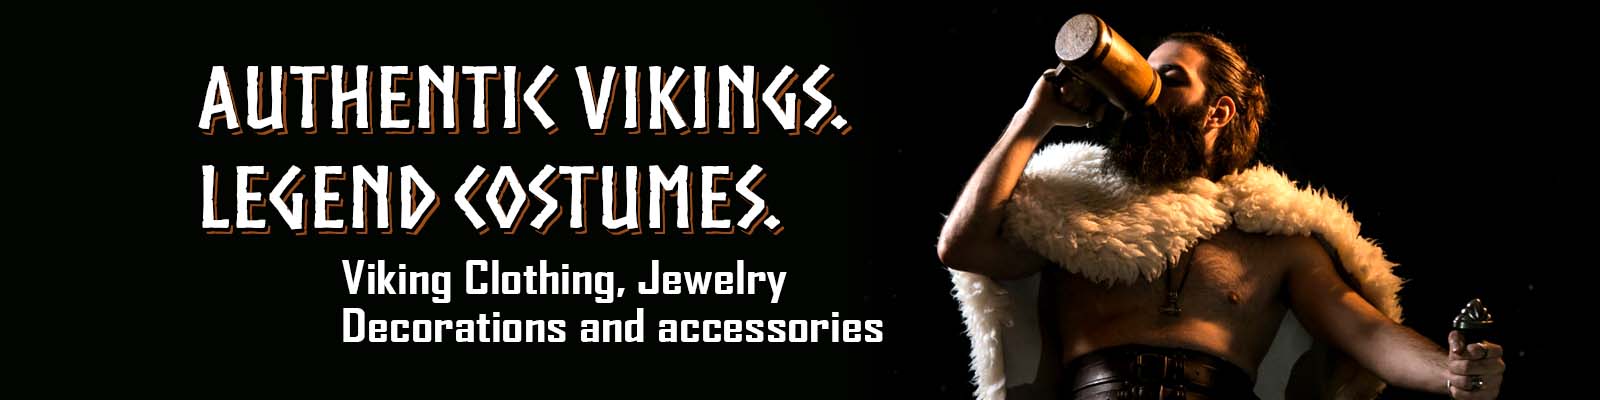 Authentic vikings Viking Sons Of Odin